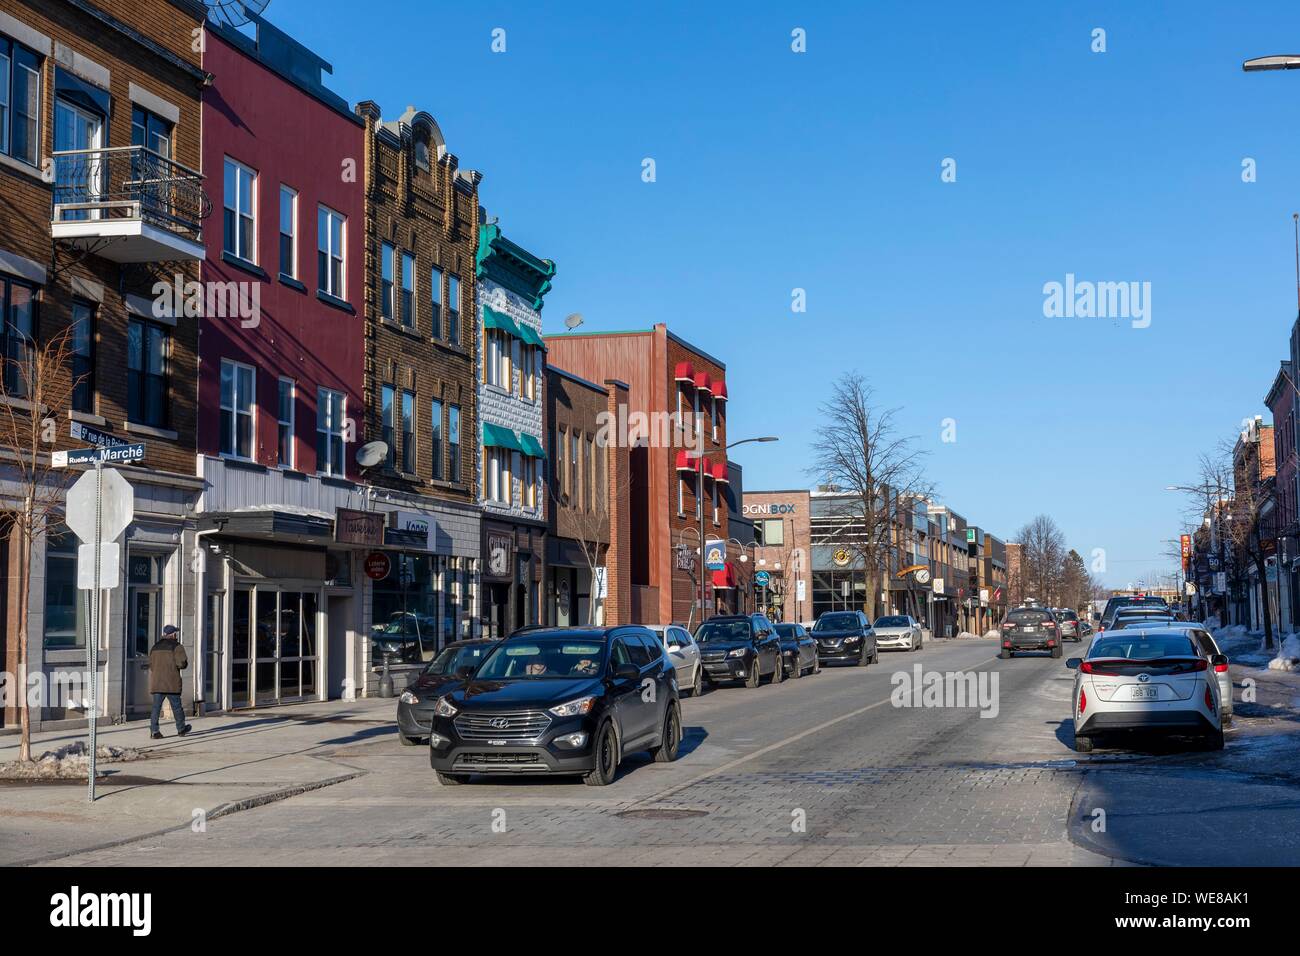 Canada, Quebec province, Mauricie region, Shawinigan and surrounding area, 5th Street de la Pointe and its shops Stock Photo